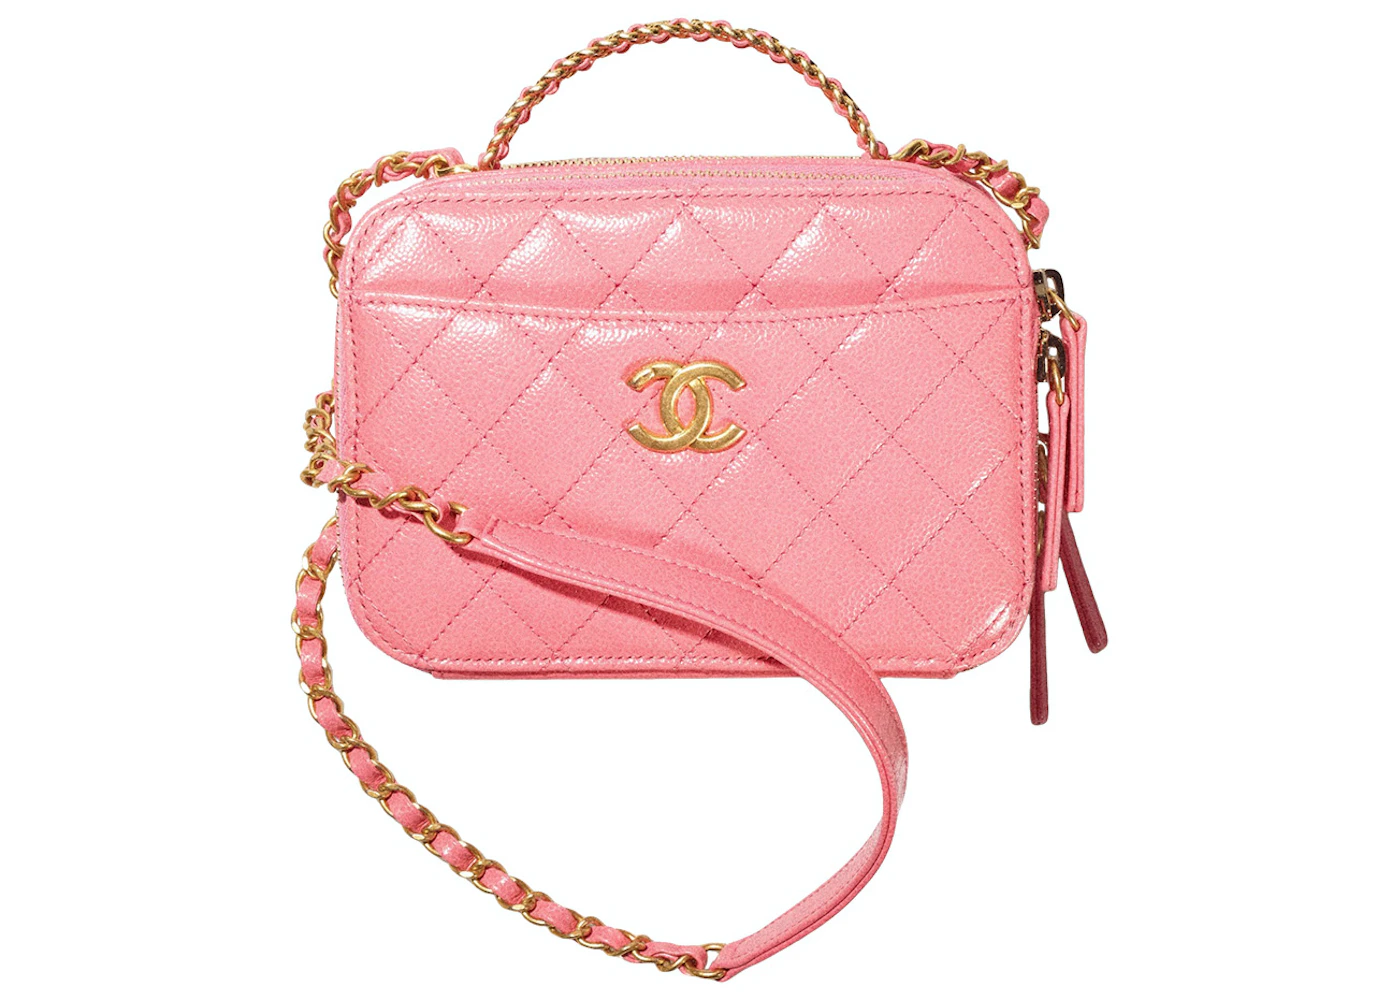 Chanel Vanity Case Bag Small 22S Calfskin Coral Pink in Calfskin